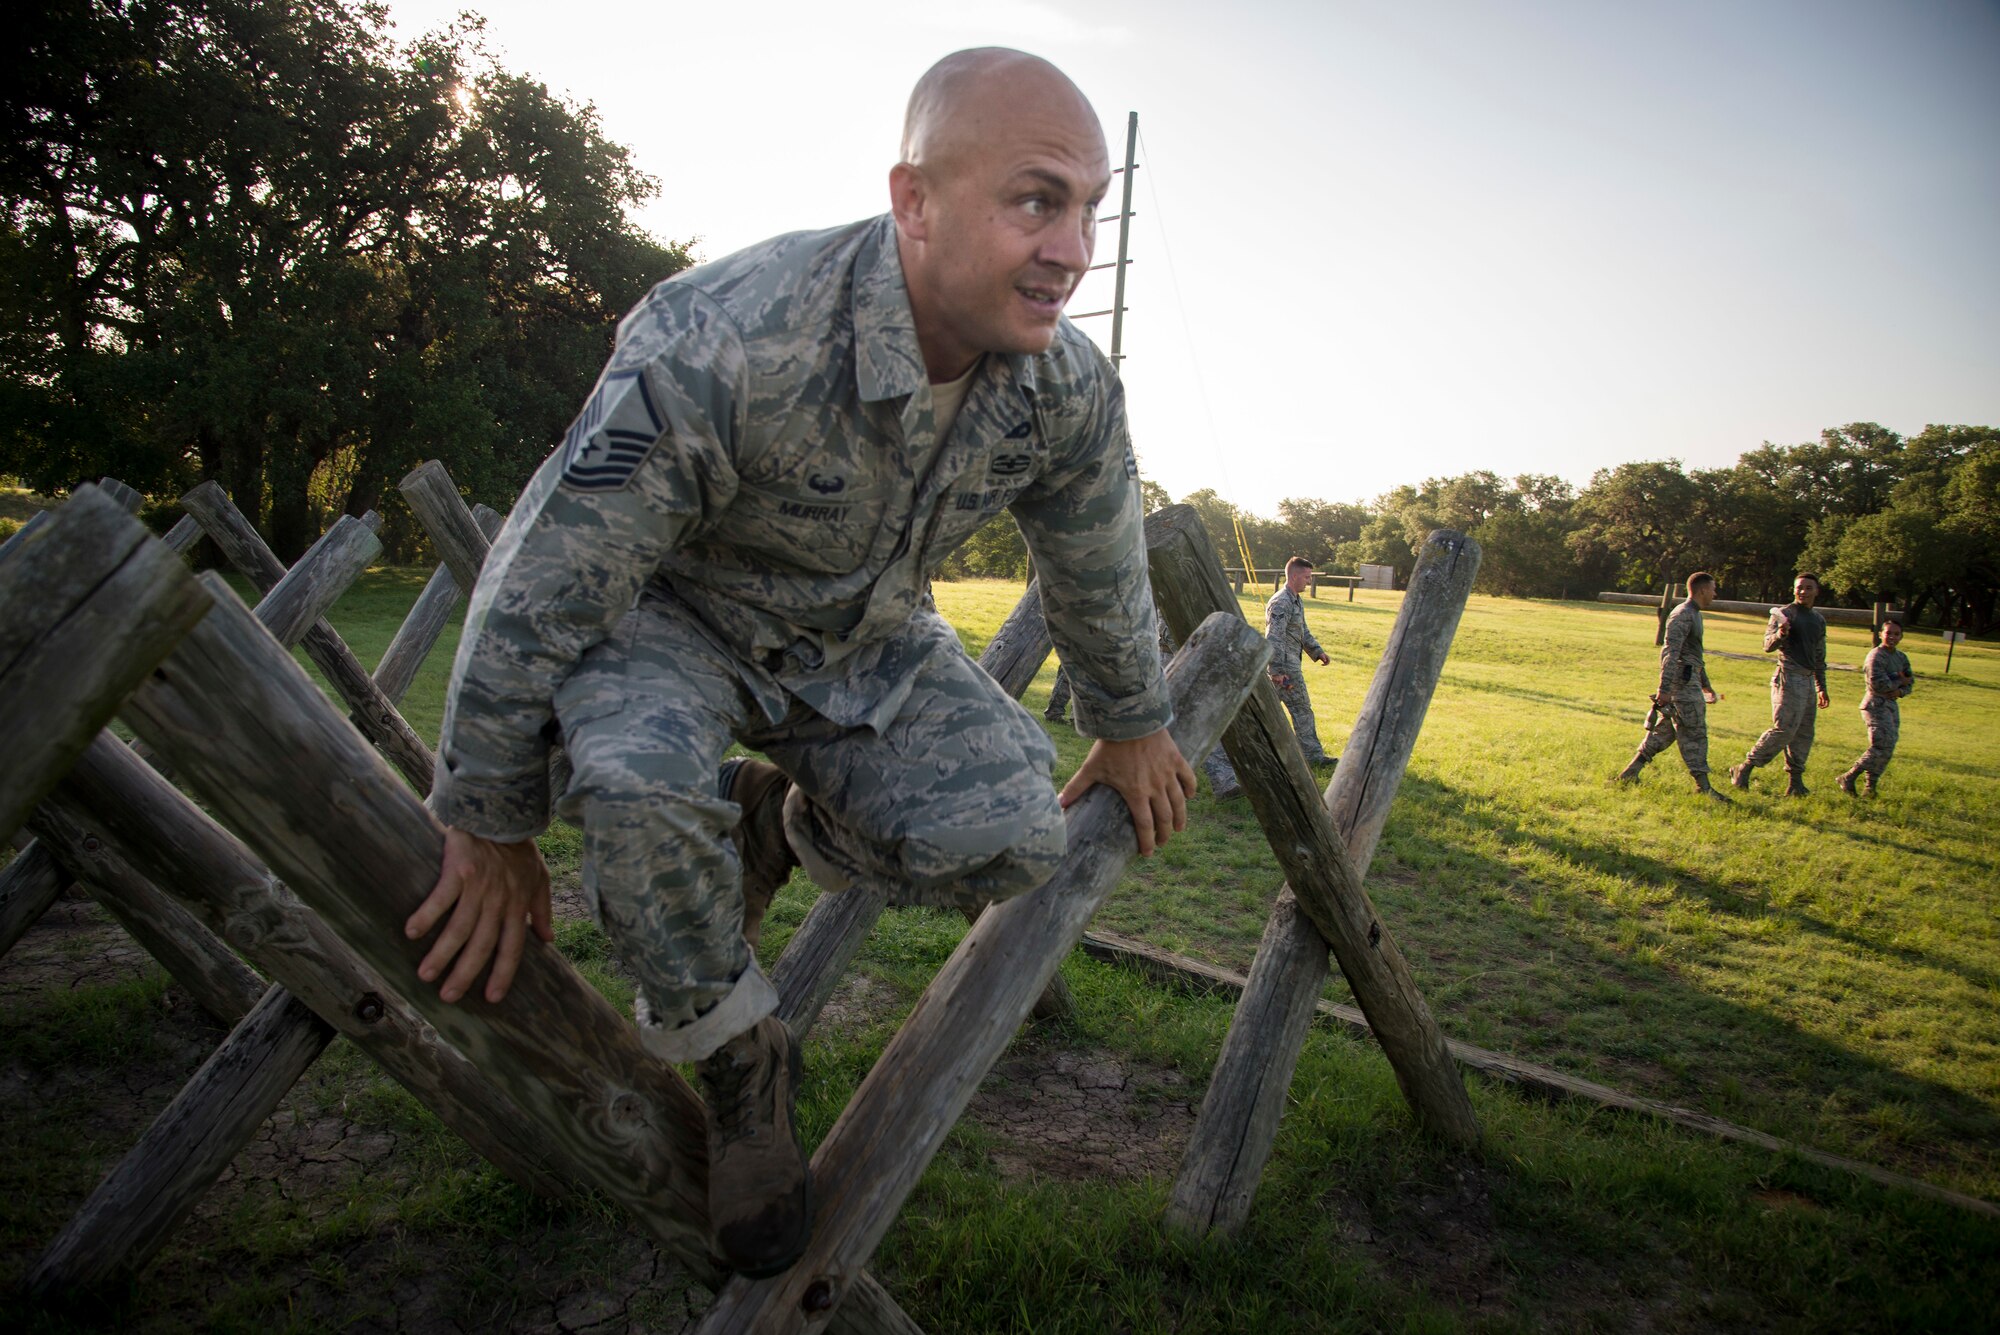 U.S. Air Force Airman Master Sgt. James Murray, 802nd Security Forces Squadron, jumps over an obstacle during the Air Education and Training Command’s Defender Challenge team selection July 23, 2018, at Joint Base San Antonio-Camp Bullis, Texas. Defender Challenge is a Security Forces competition that pits teams against each other in realistic weapons, dismounted operations and relay challenge events.